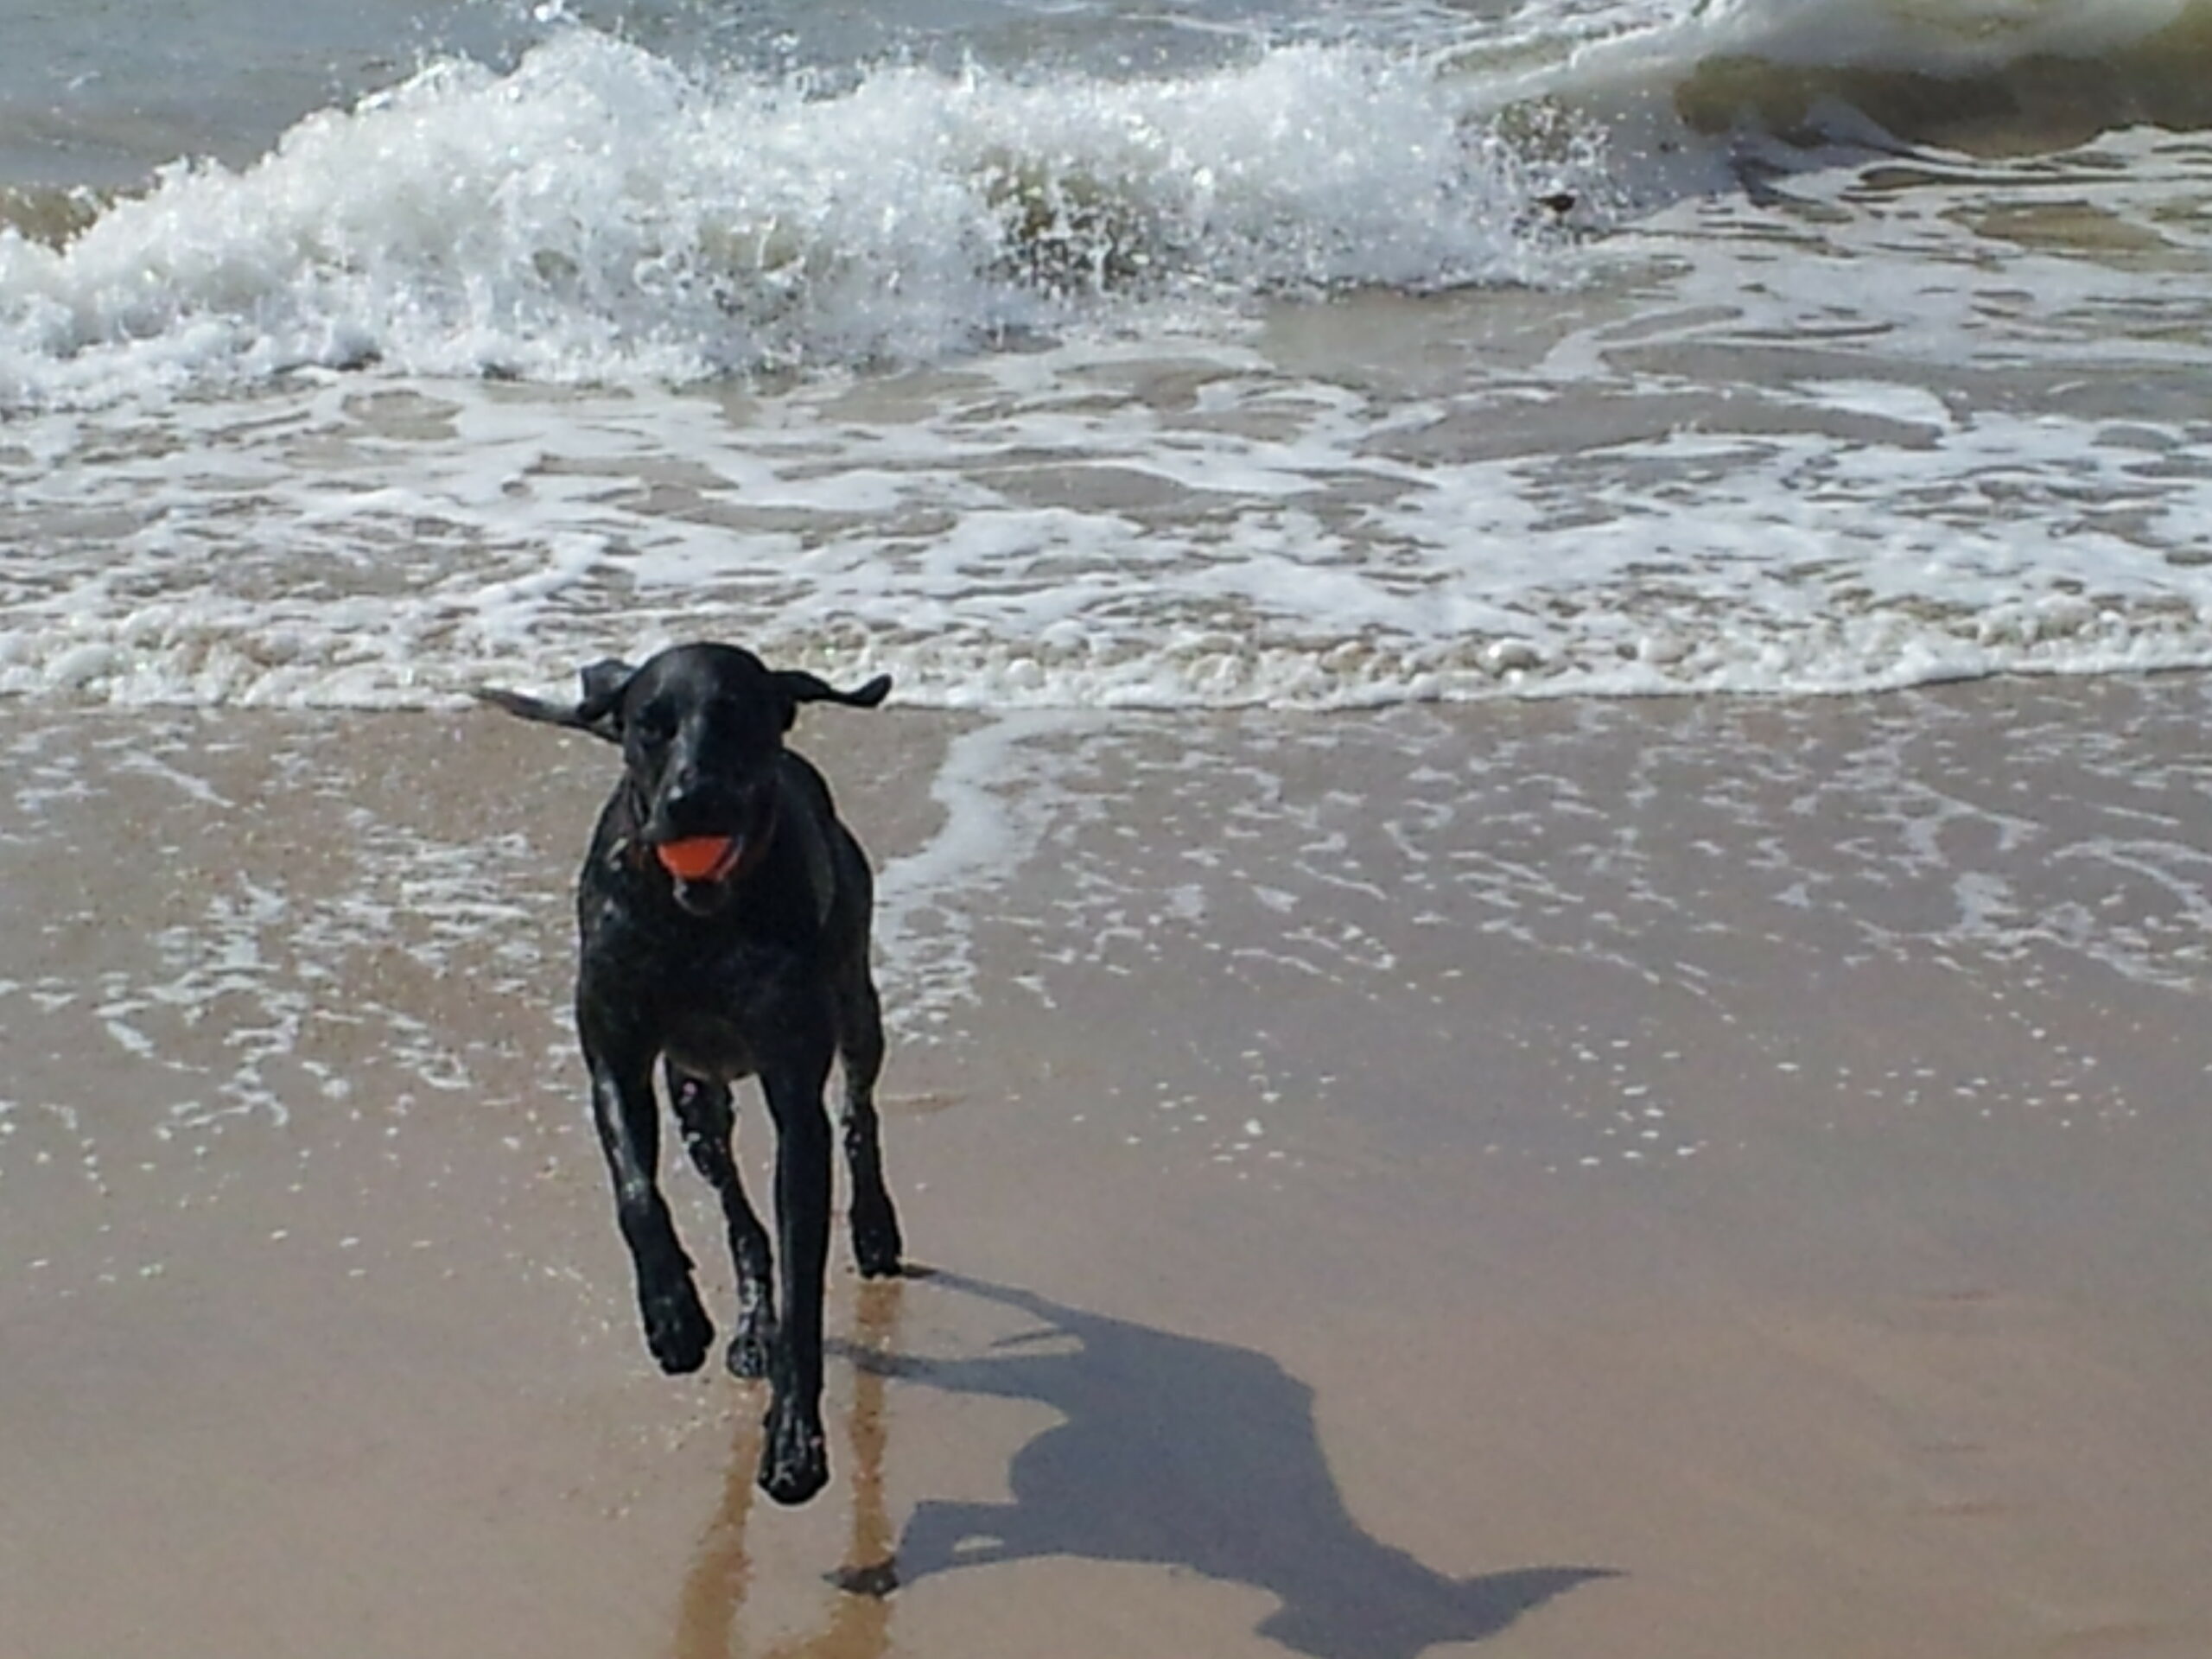 Most dogs love to run and play on dog friendly beaches